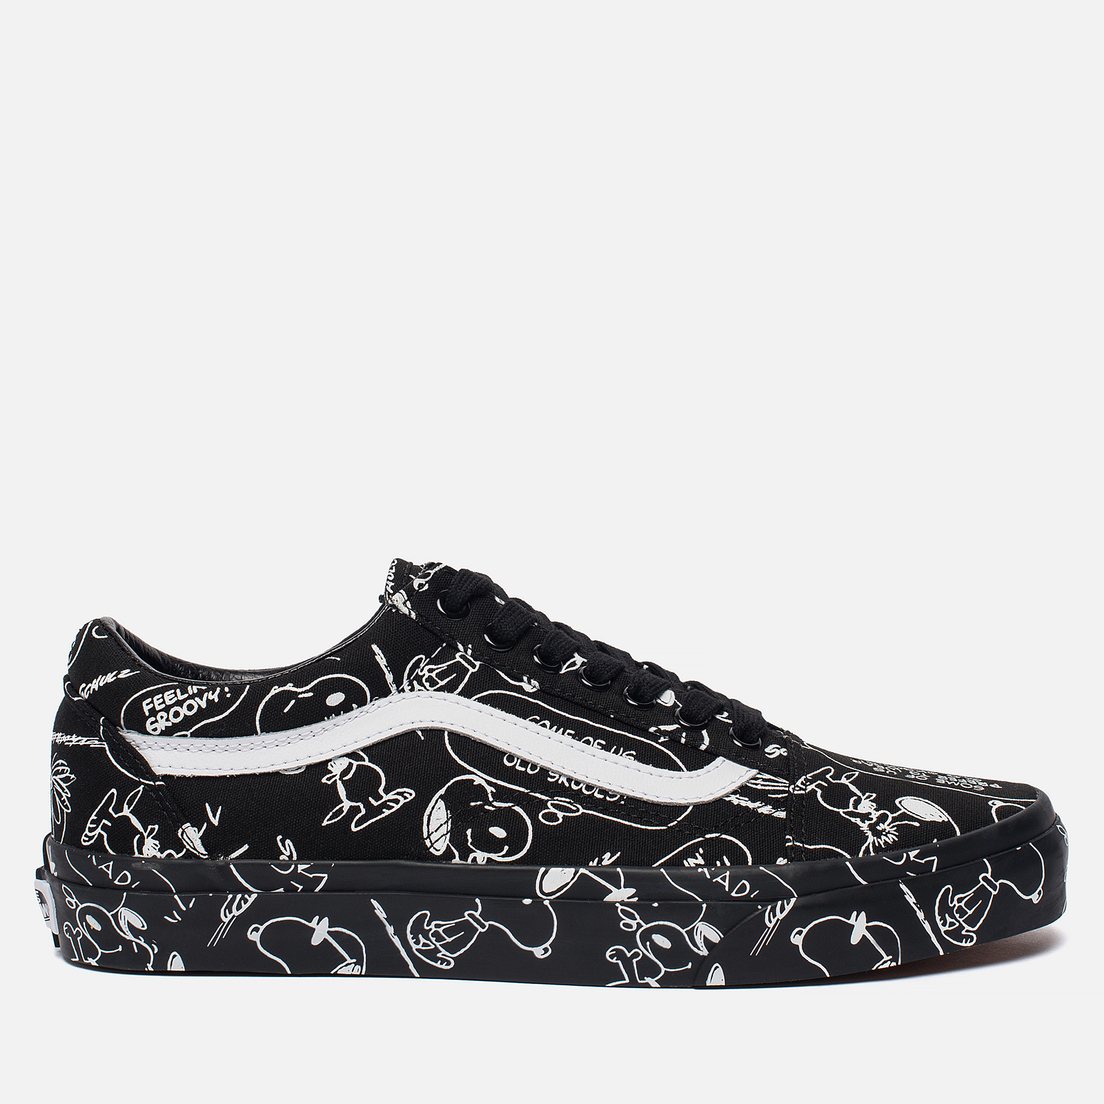 snoopy vans black and white